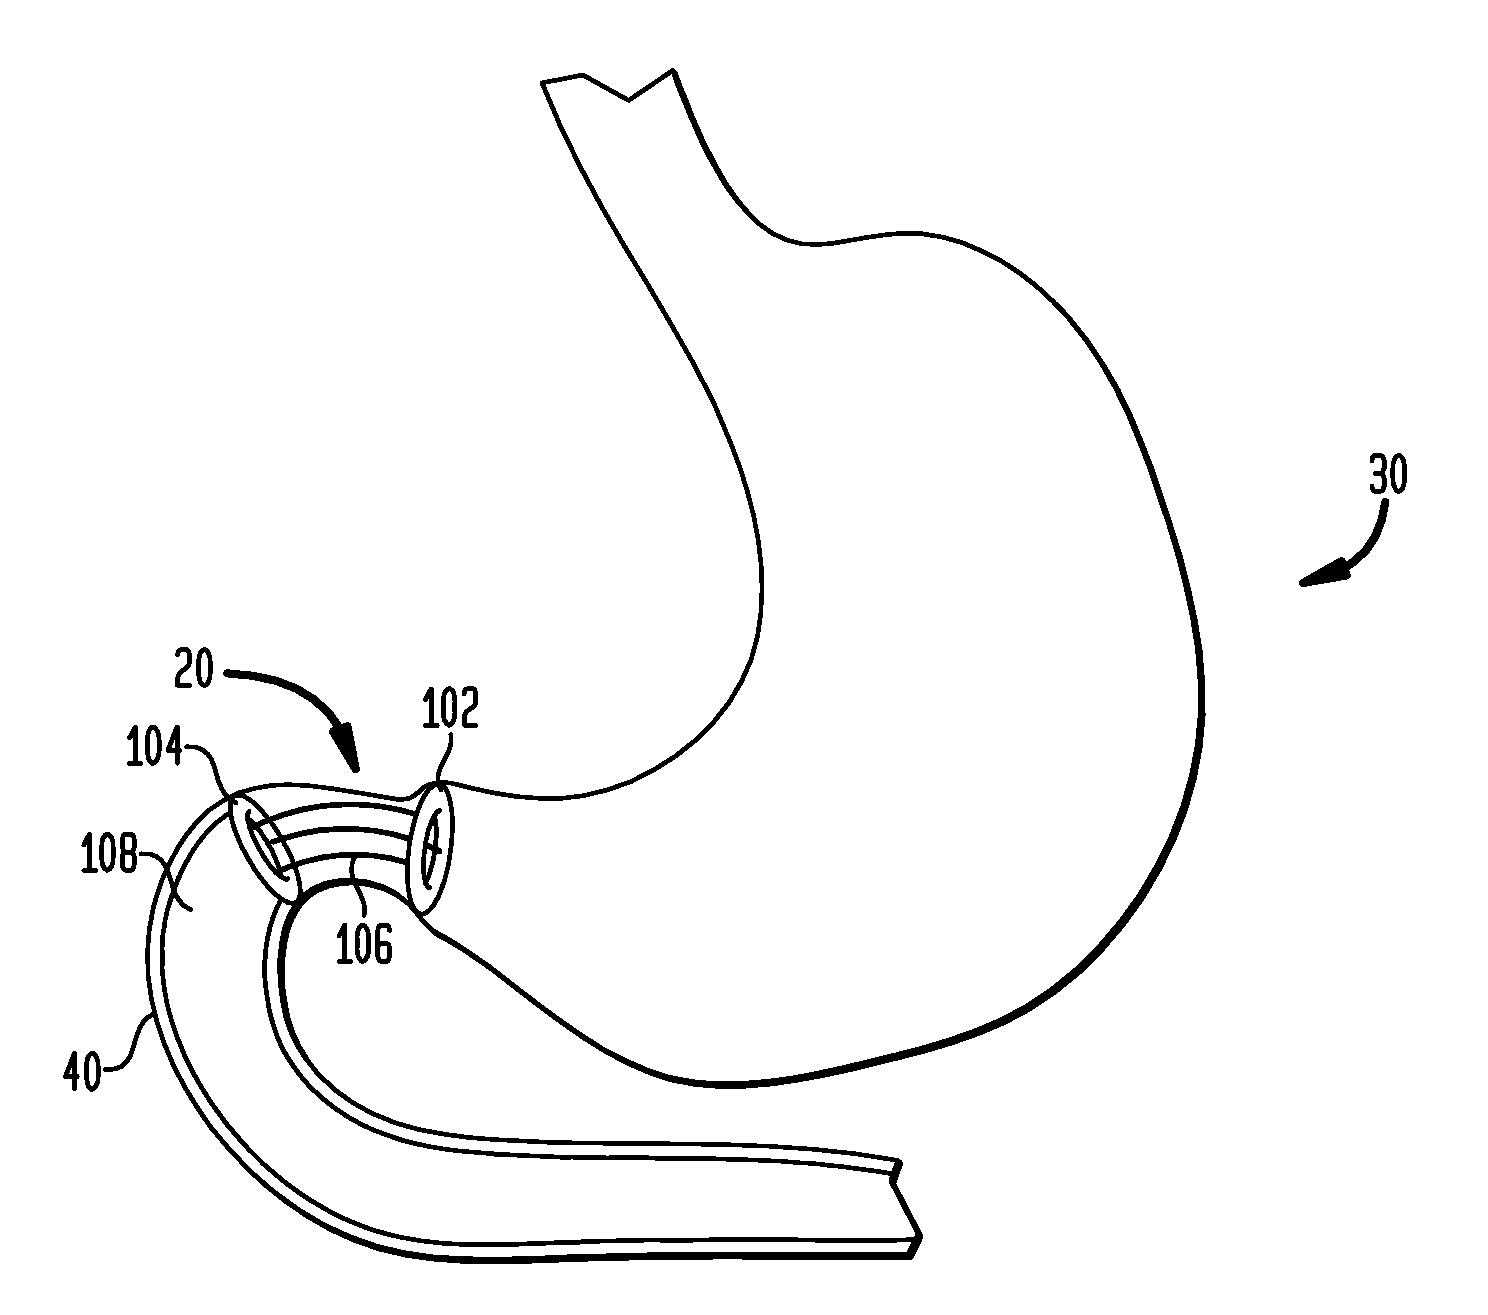 Systems and methods for treatment of obesity and type 2 diabetes